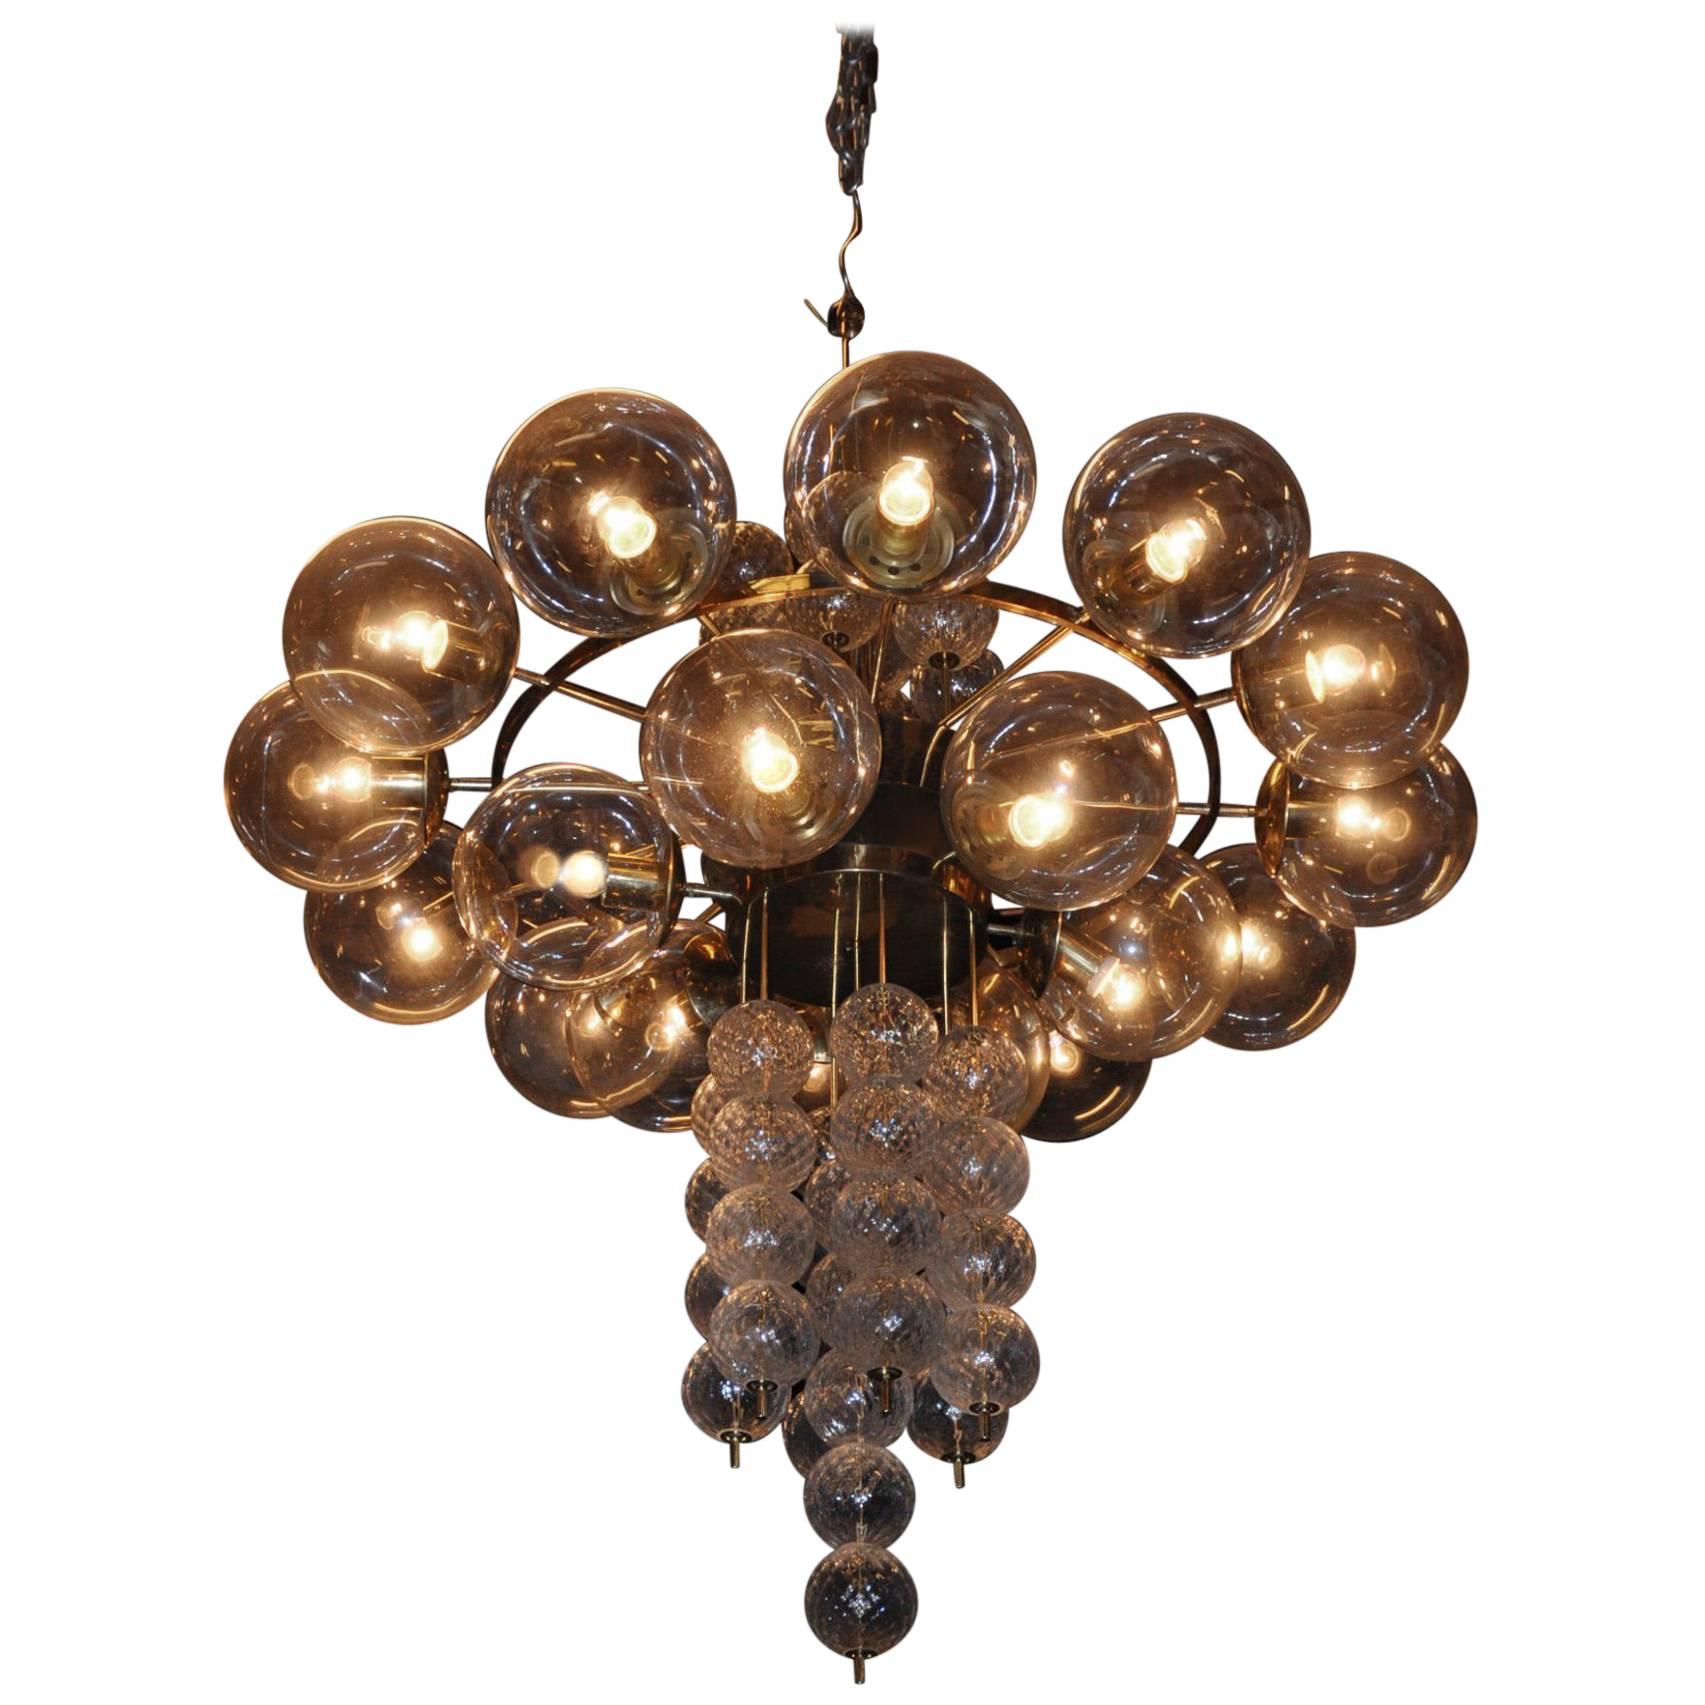 Extremely Large Handblown Glass Chandelier, Czech Republic, 1960s